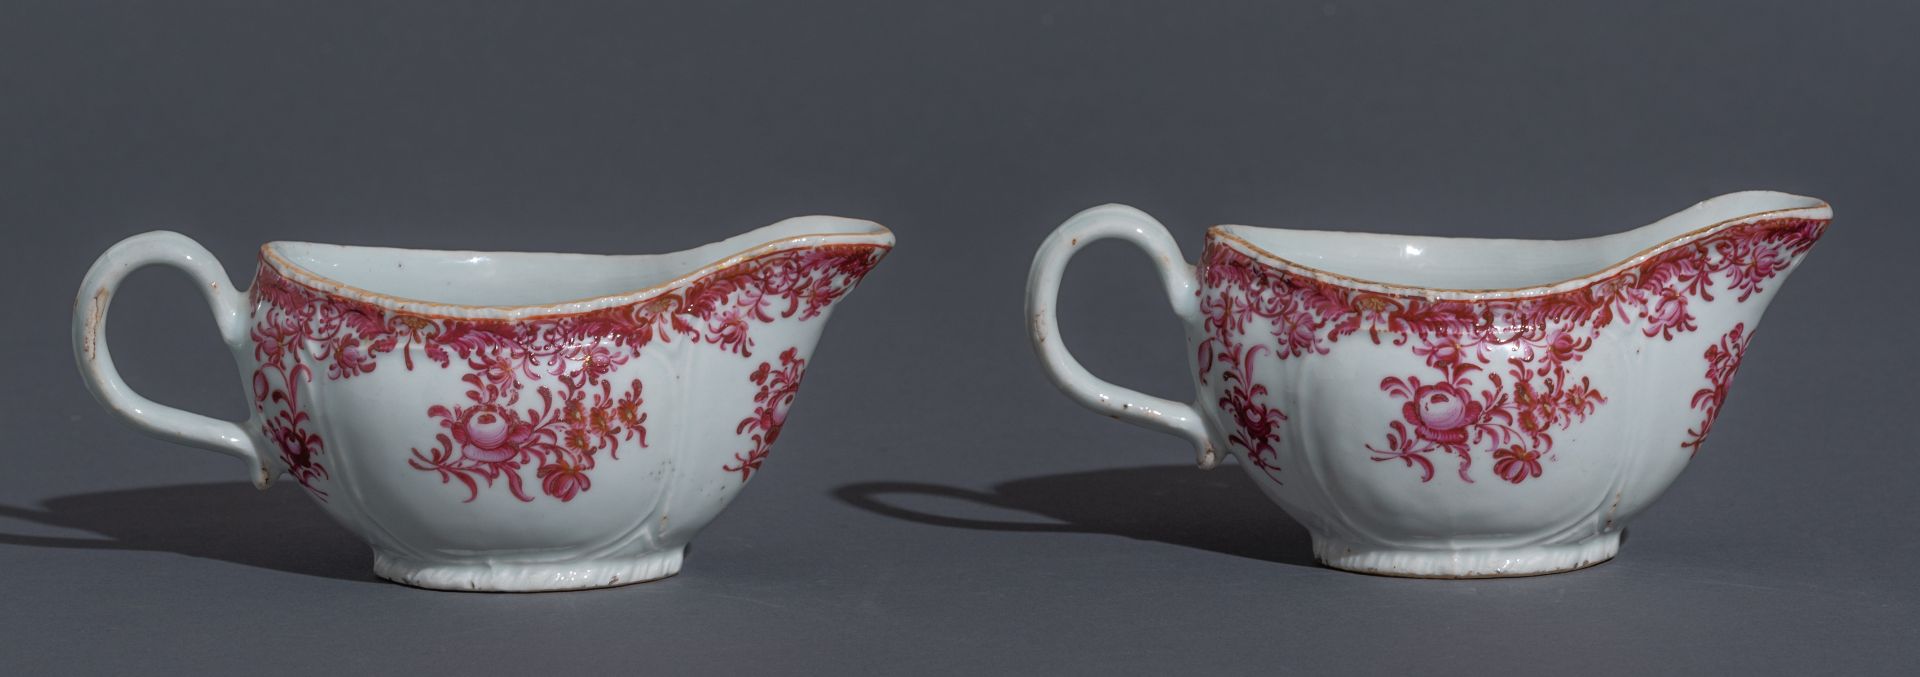 A pair of Chinese 'Purple of Cassius' export porcelain saucers - Image 4 of 7